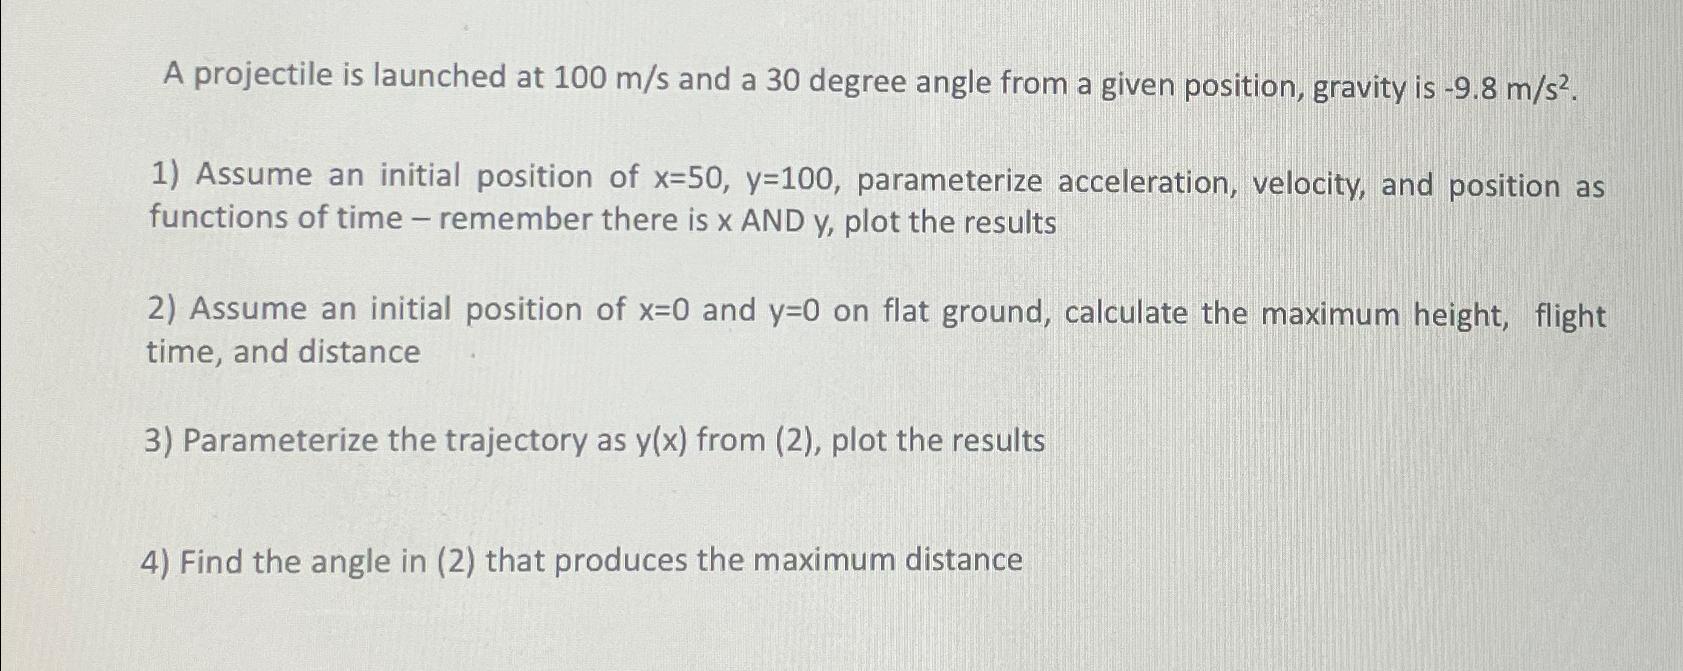 A projectile is launched at 100 m/s and a 30 degree angle from a given position, gravity is -9.8 m/s. 1)